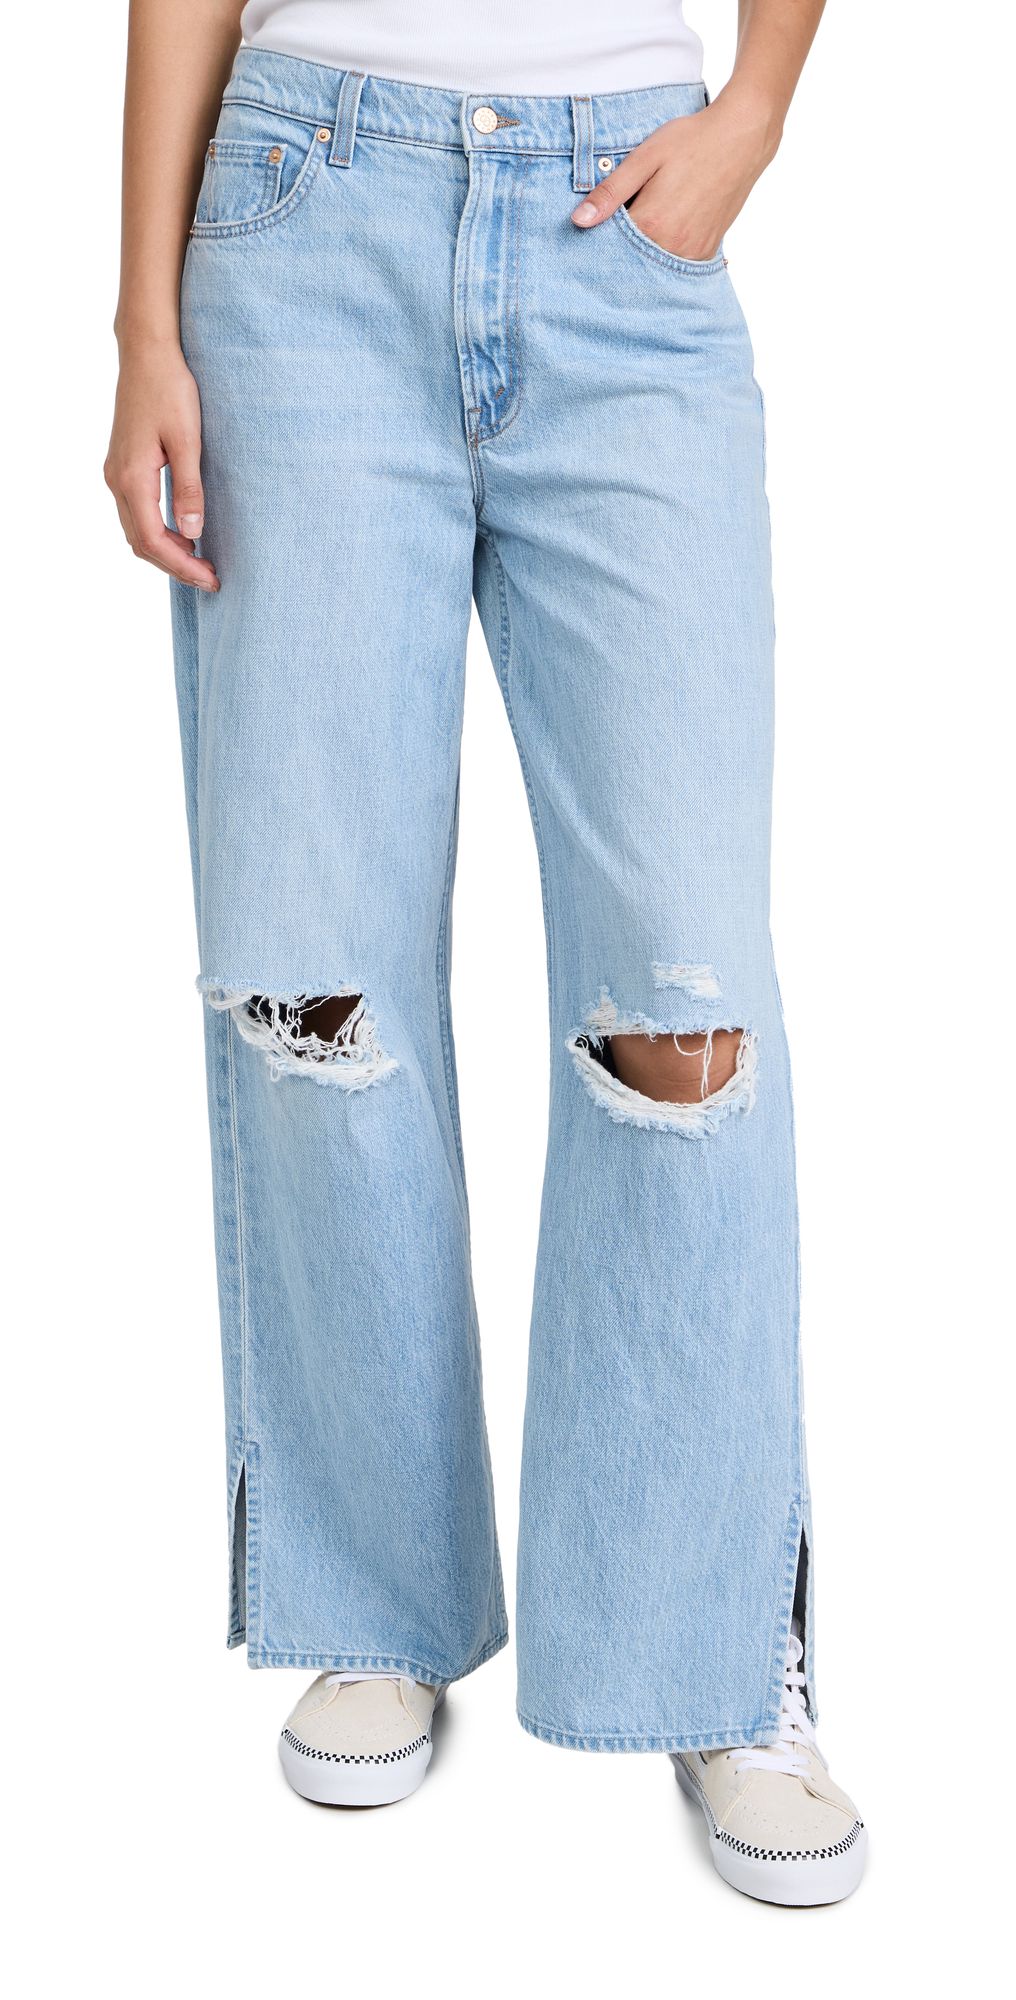 SNACKS! The Fun Dip Puddle Slice Jeans | Shopbop